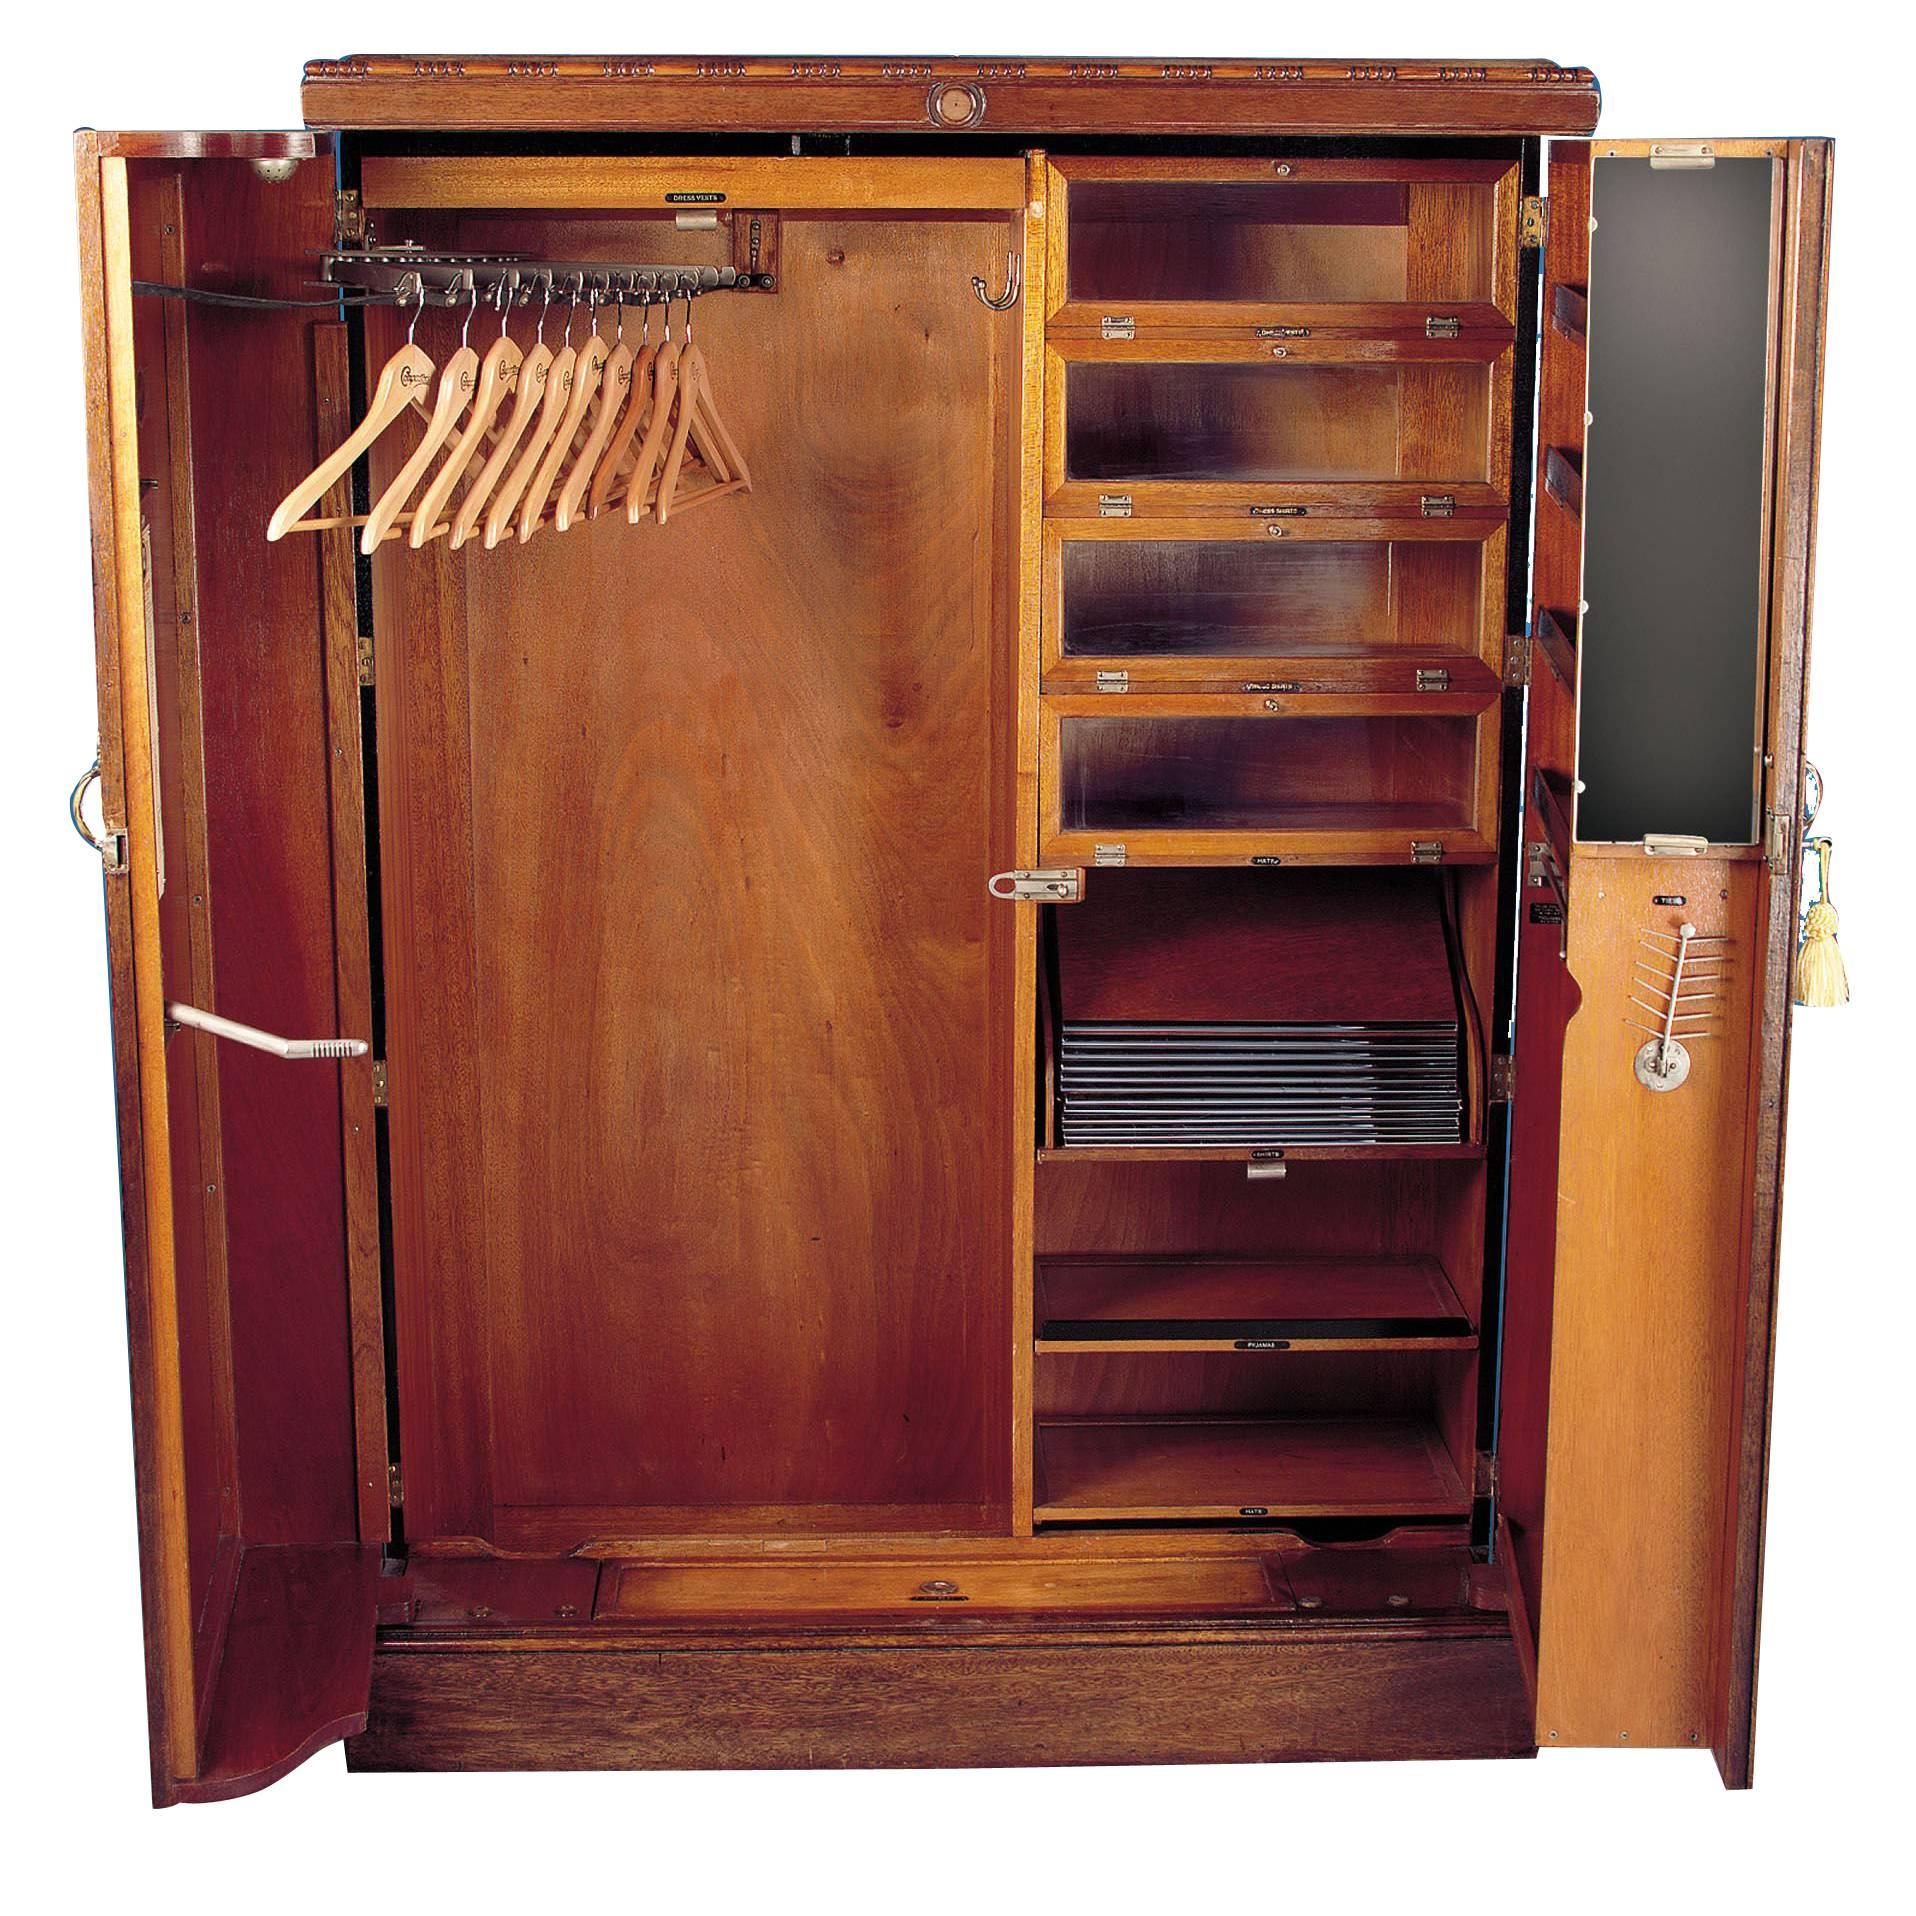 Ship Wardrobe by Compactom of London